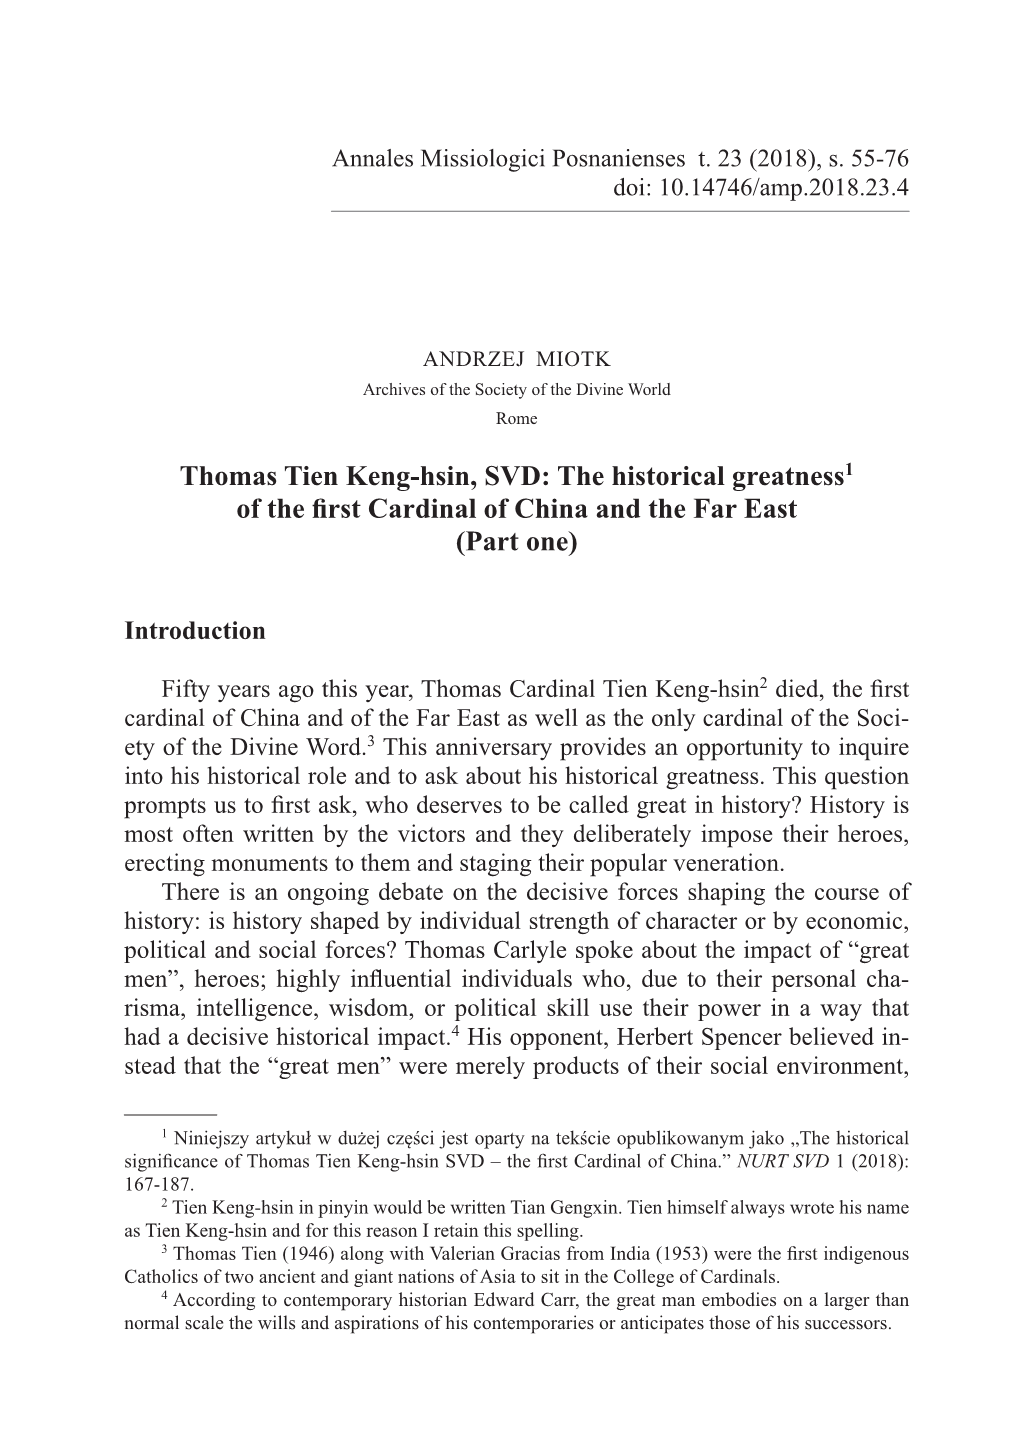 Thomas Tien Keng-Hsin, SVD: the Historical Greatness1 of the ﬁ Rst Cardinal of China and the Far East (Part One)